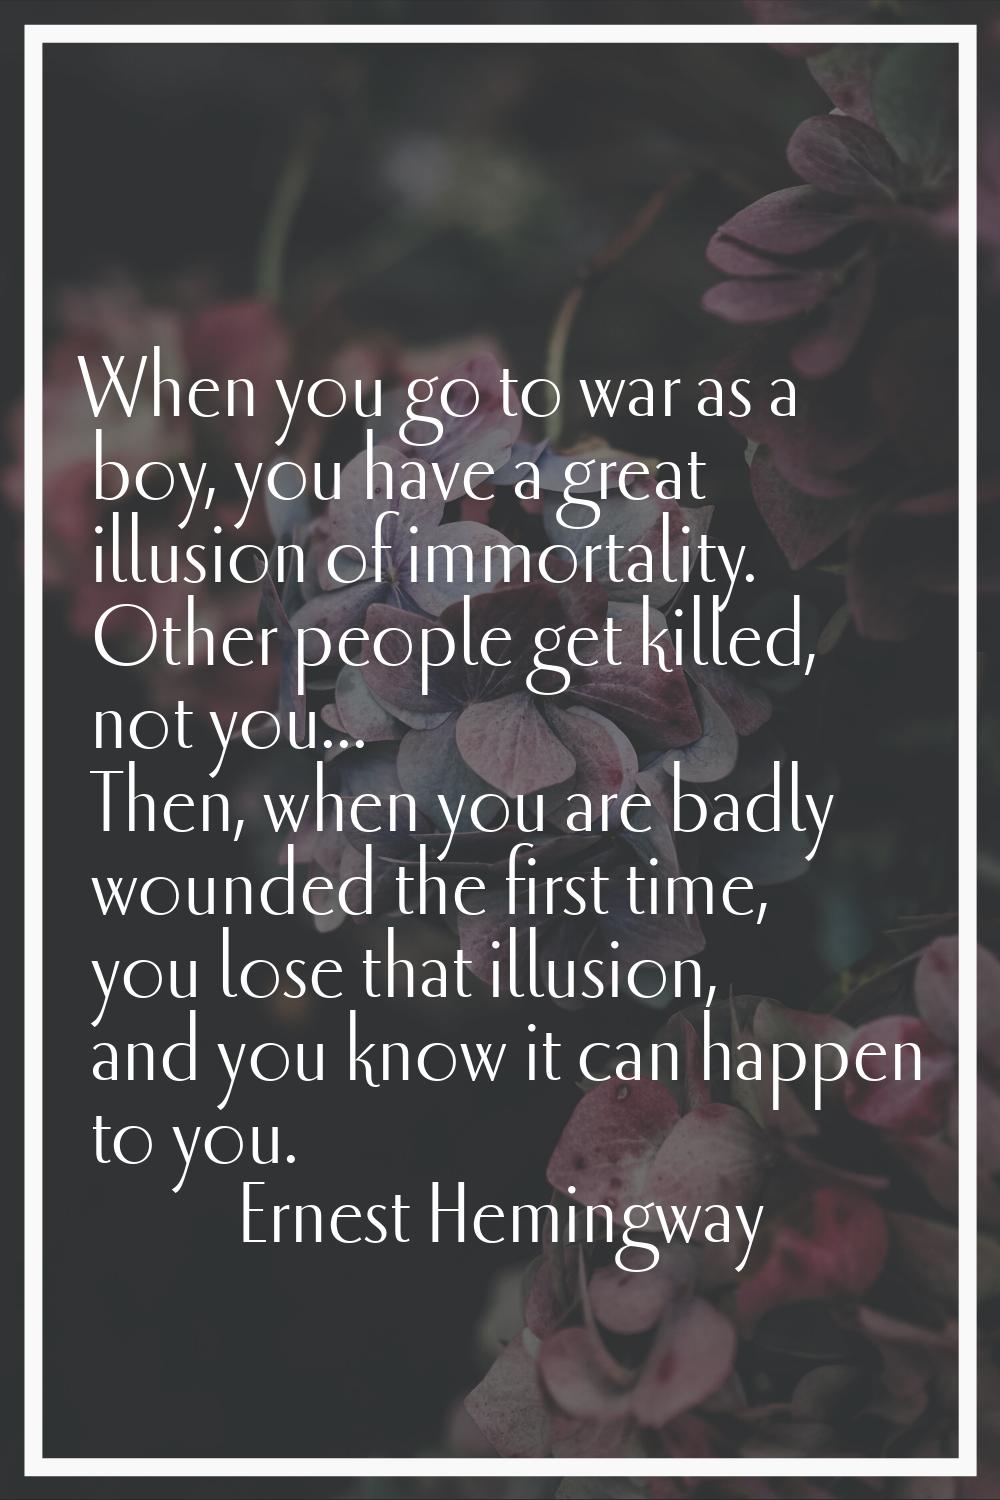 When you go to war as a boy, you have a great illusion of immortality. Other people get killed, not